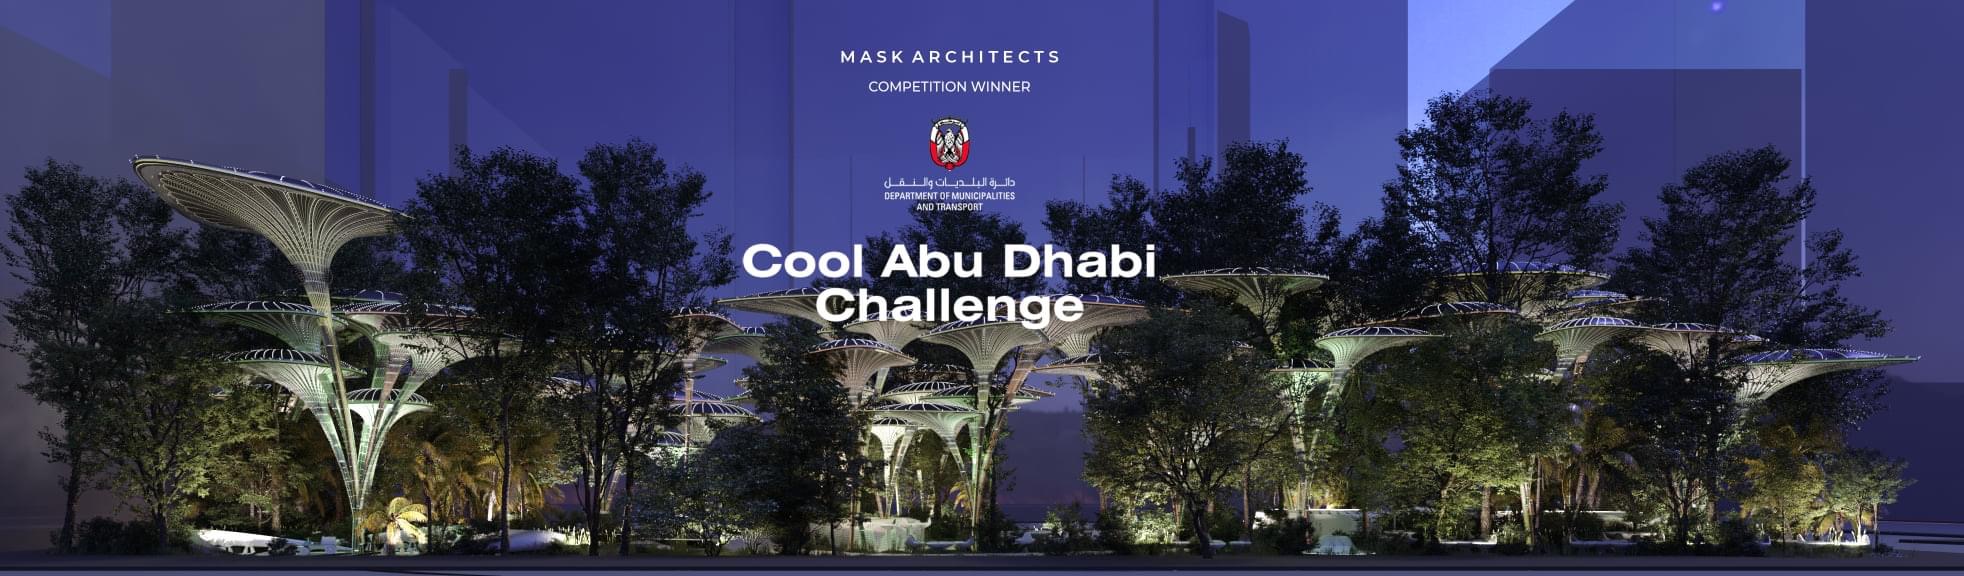 Cool Abu Dhabi Challenge Compeition / Mask Architects Winner Project